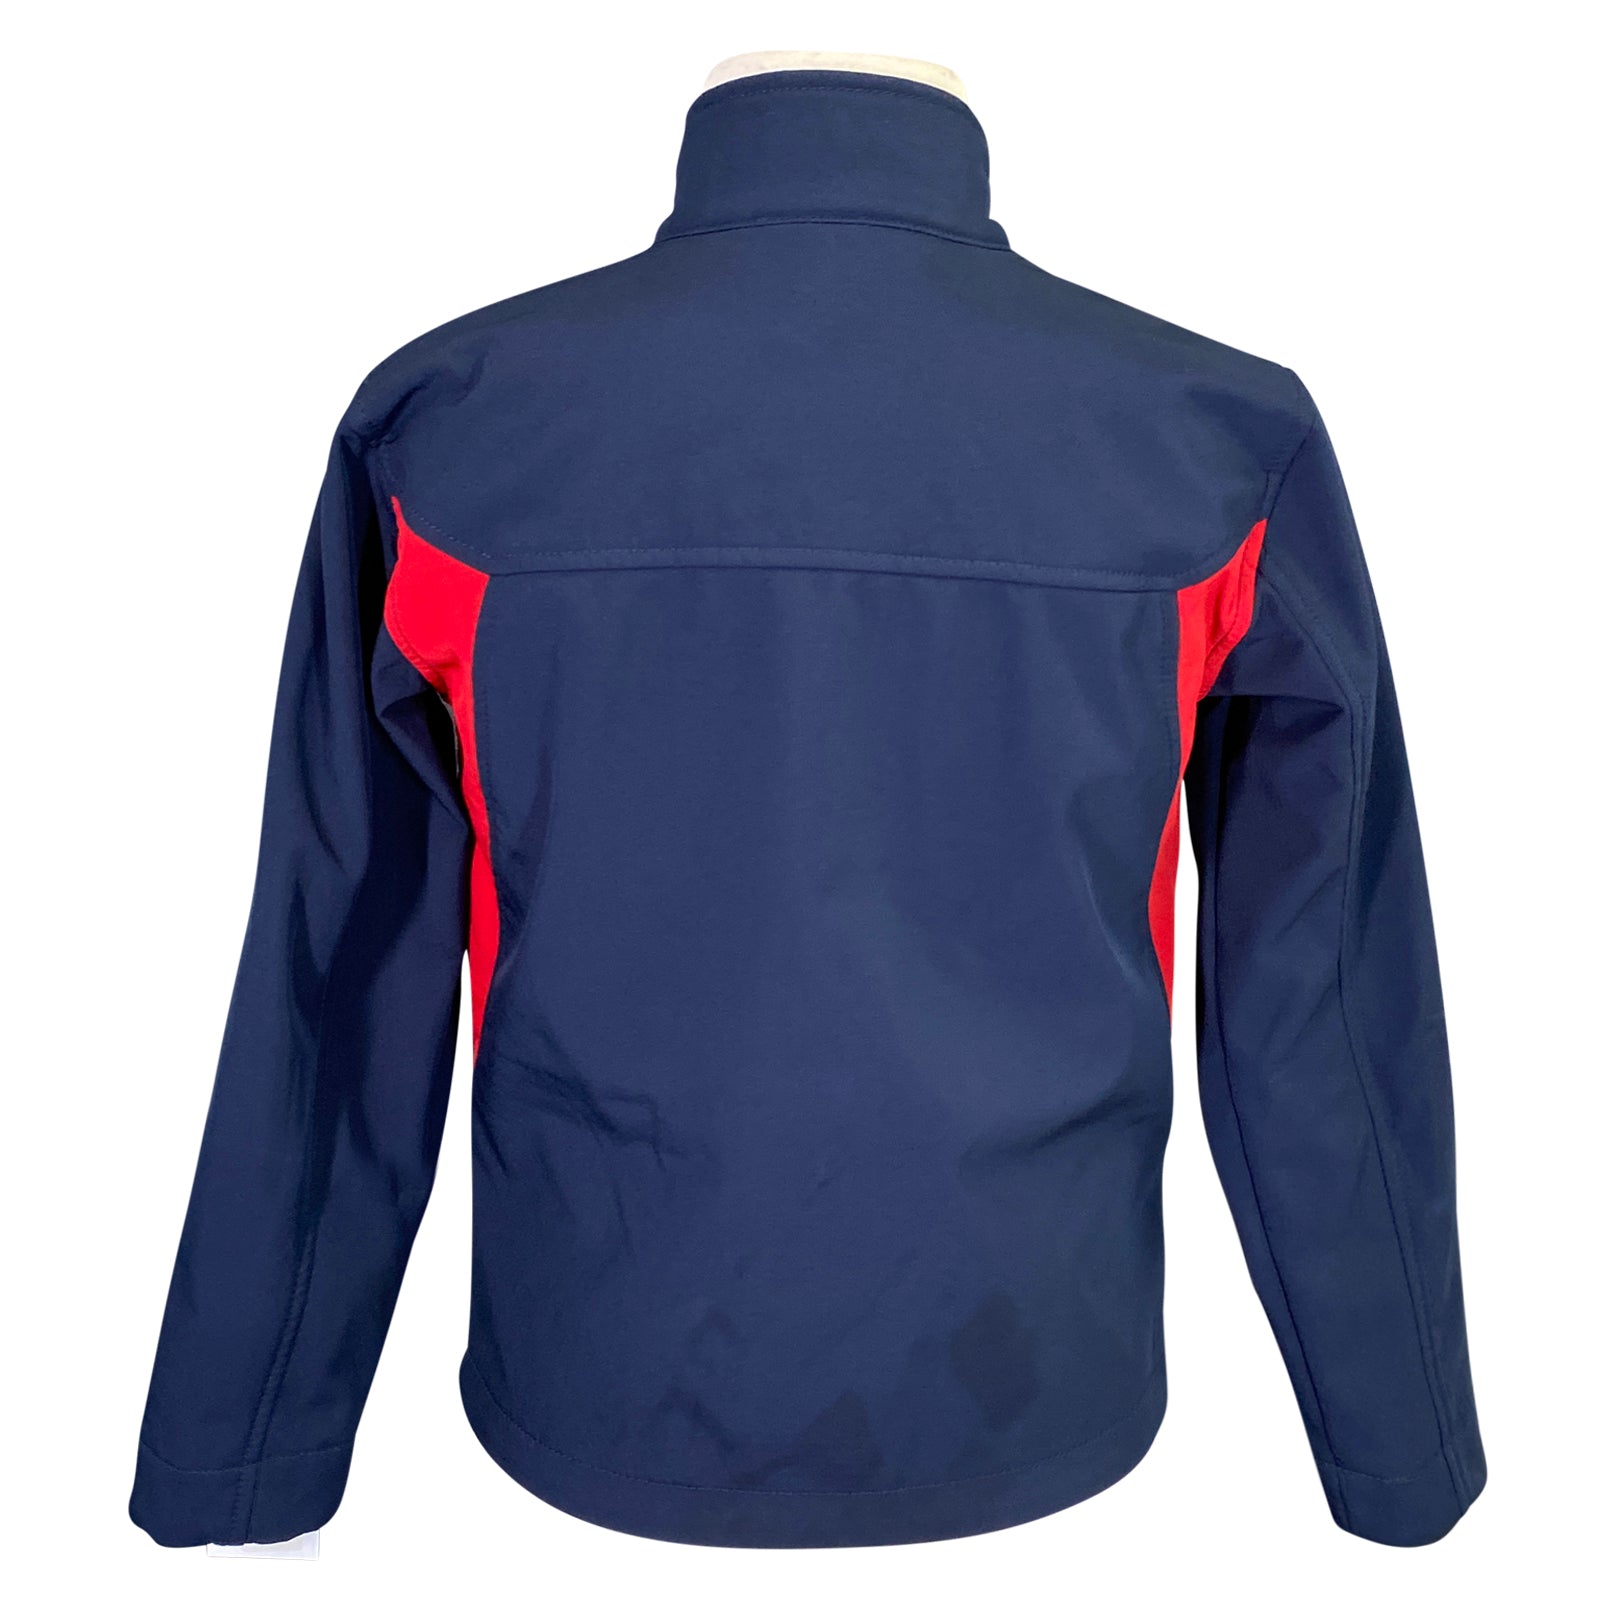 Back of Ariat Team Softshell Jacket in Navy/Red